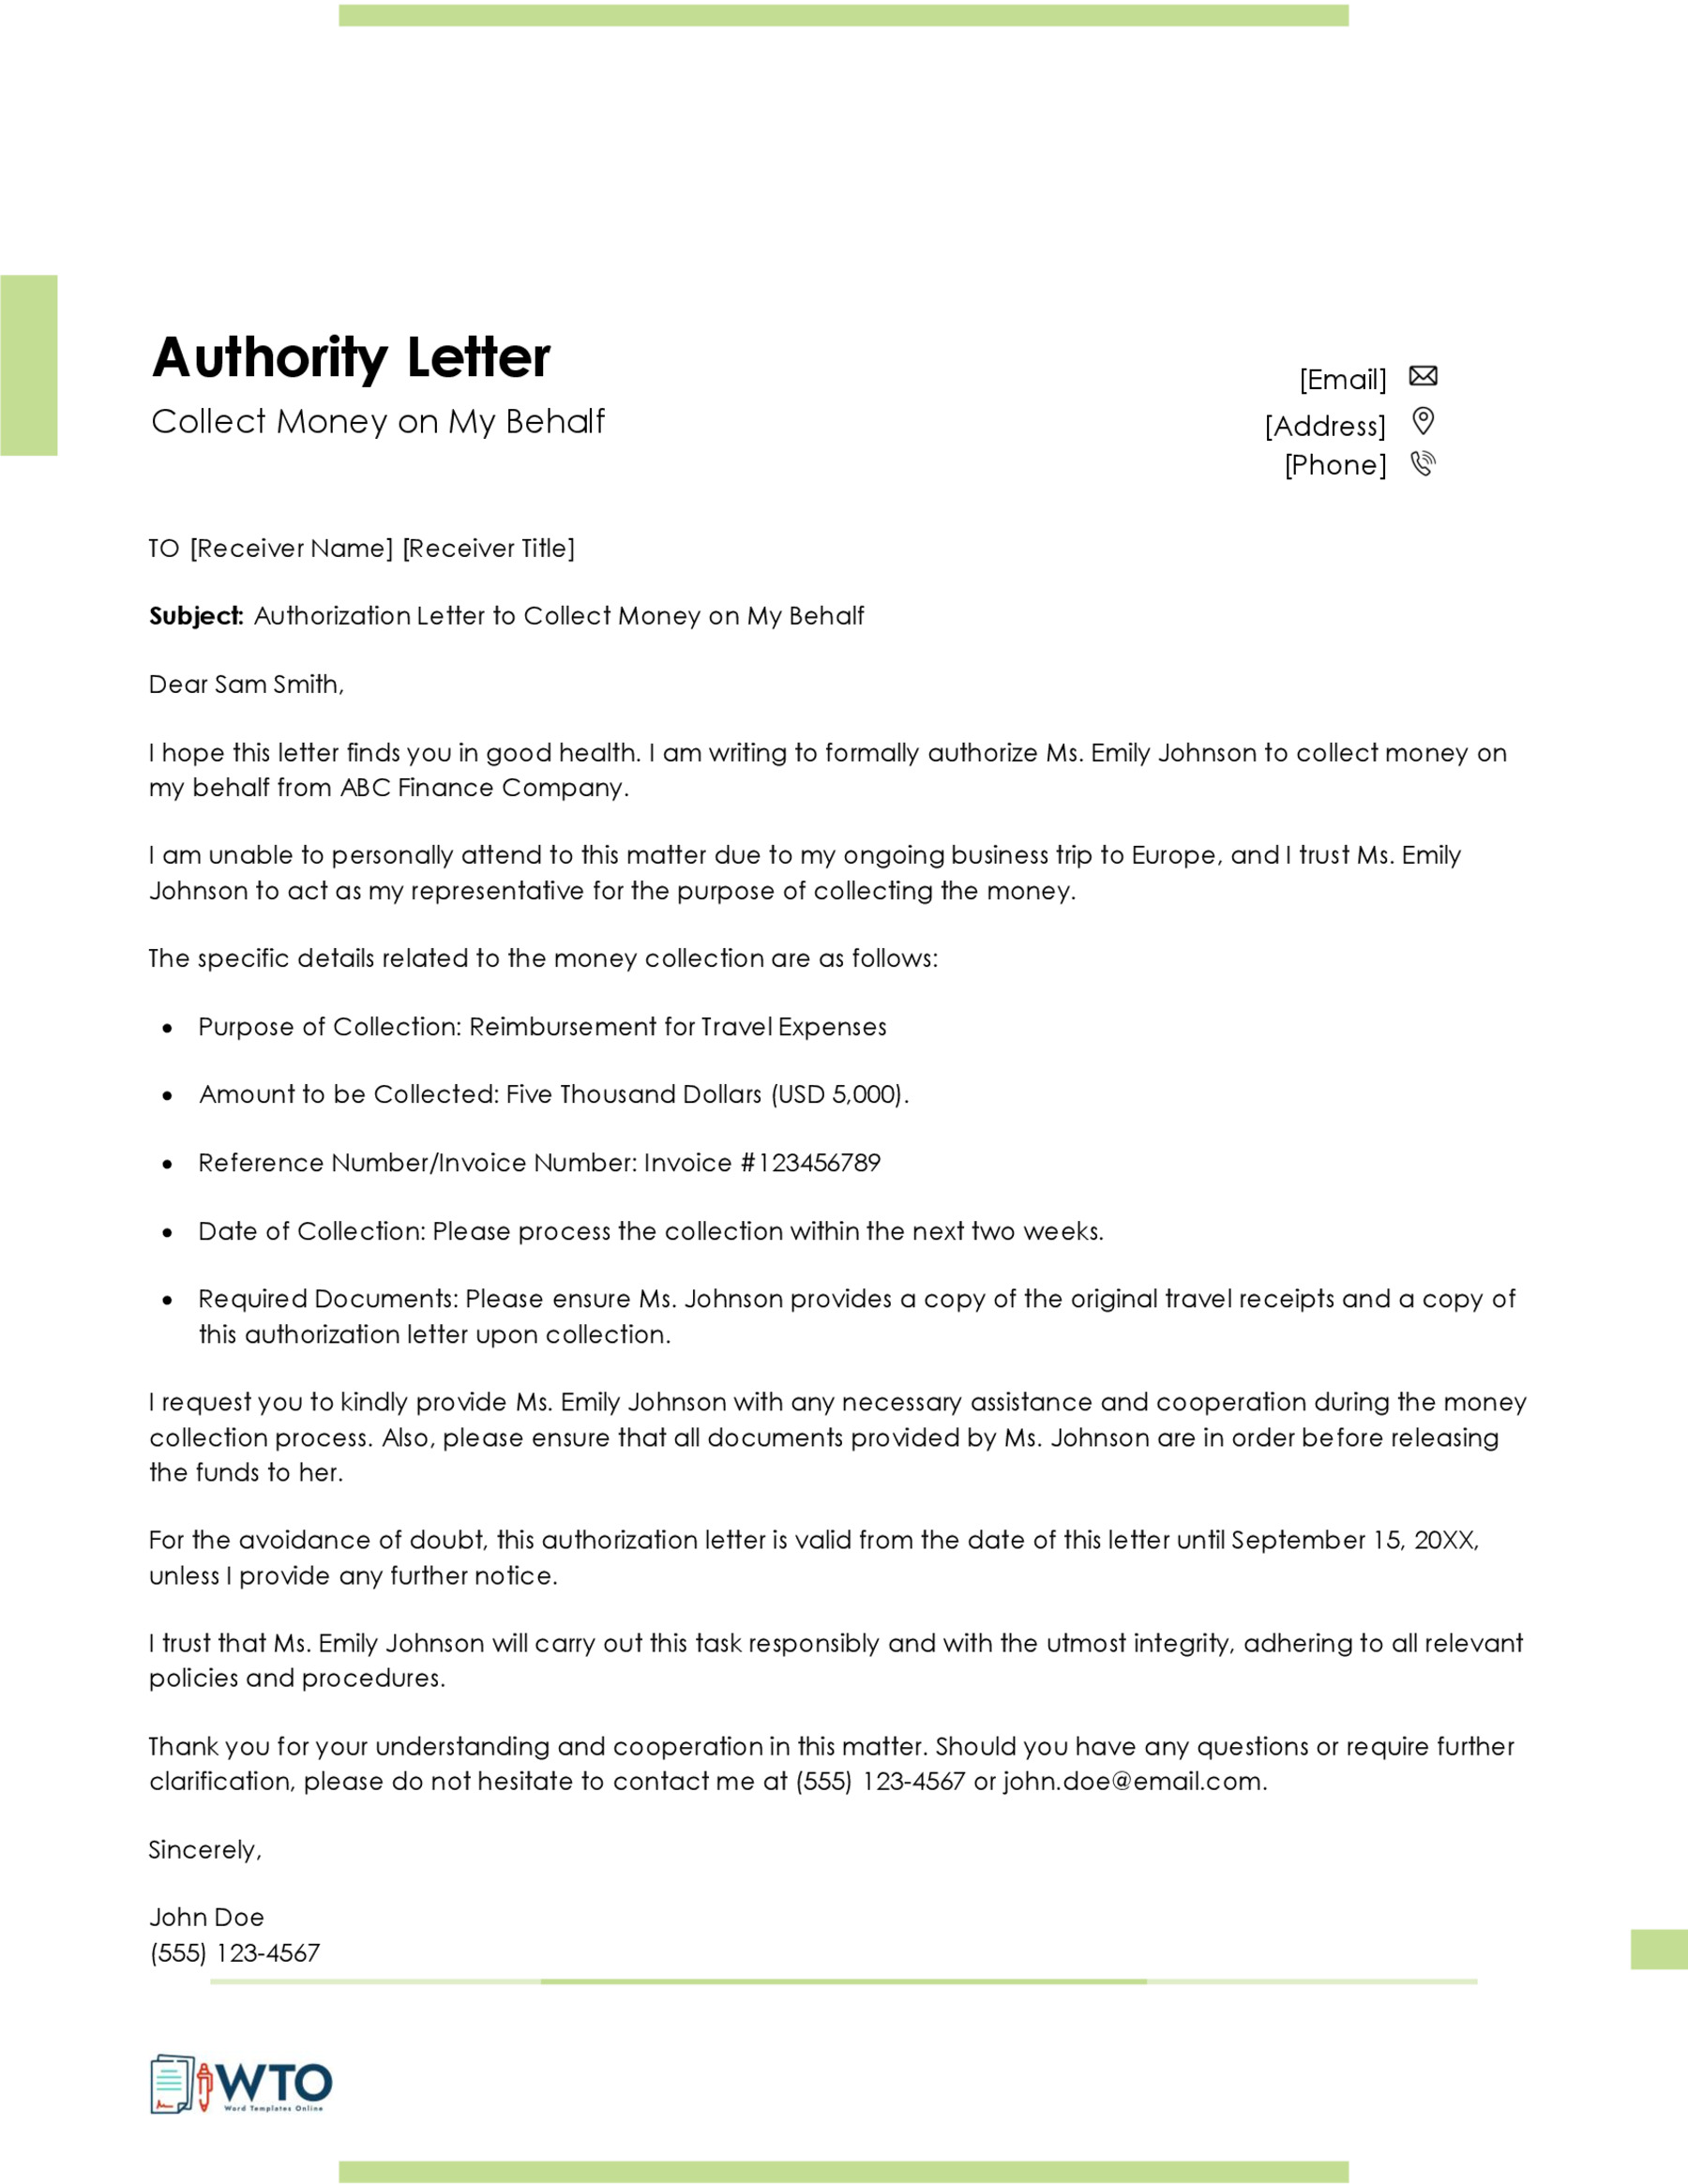 Download Free Authorization Letter in Word Format